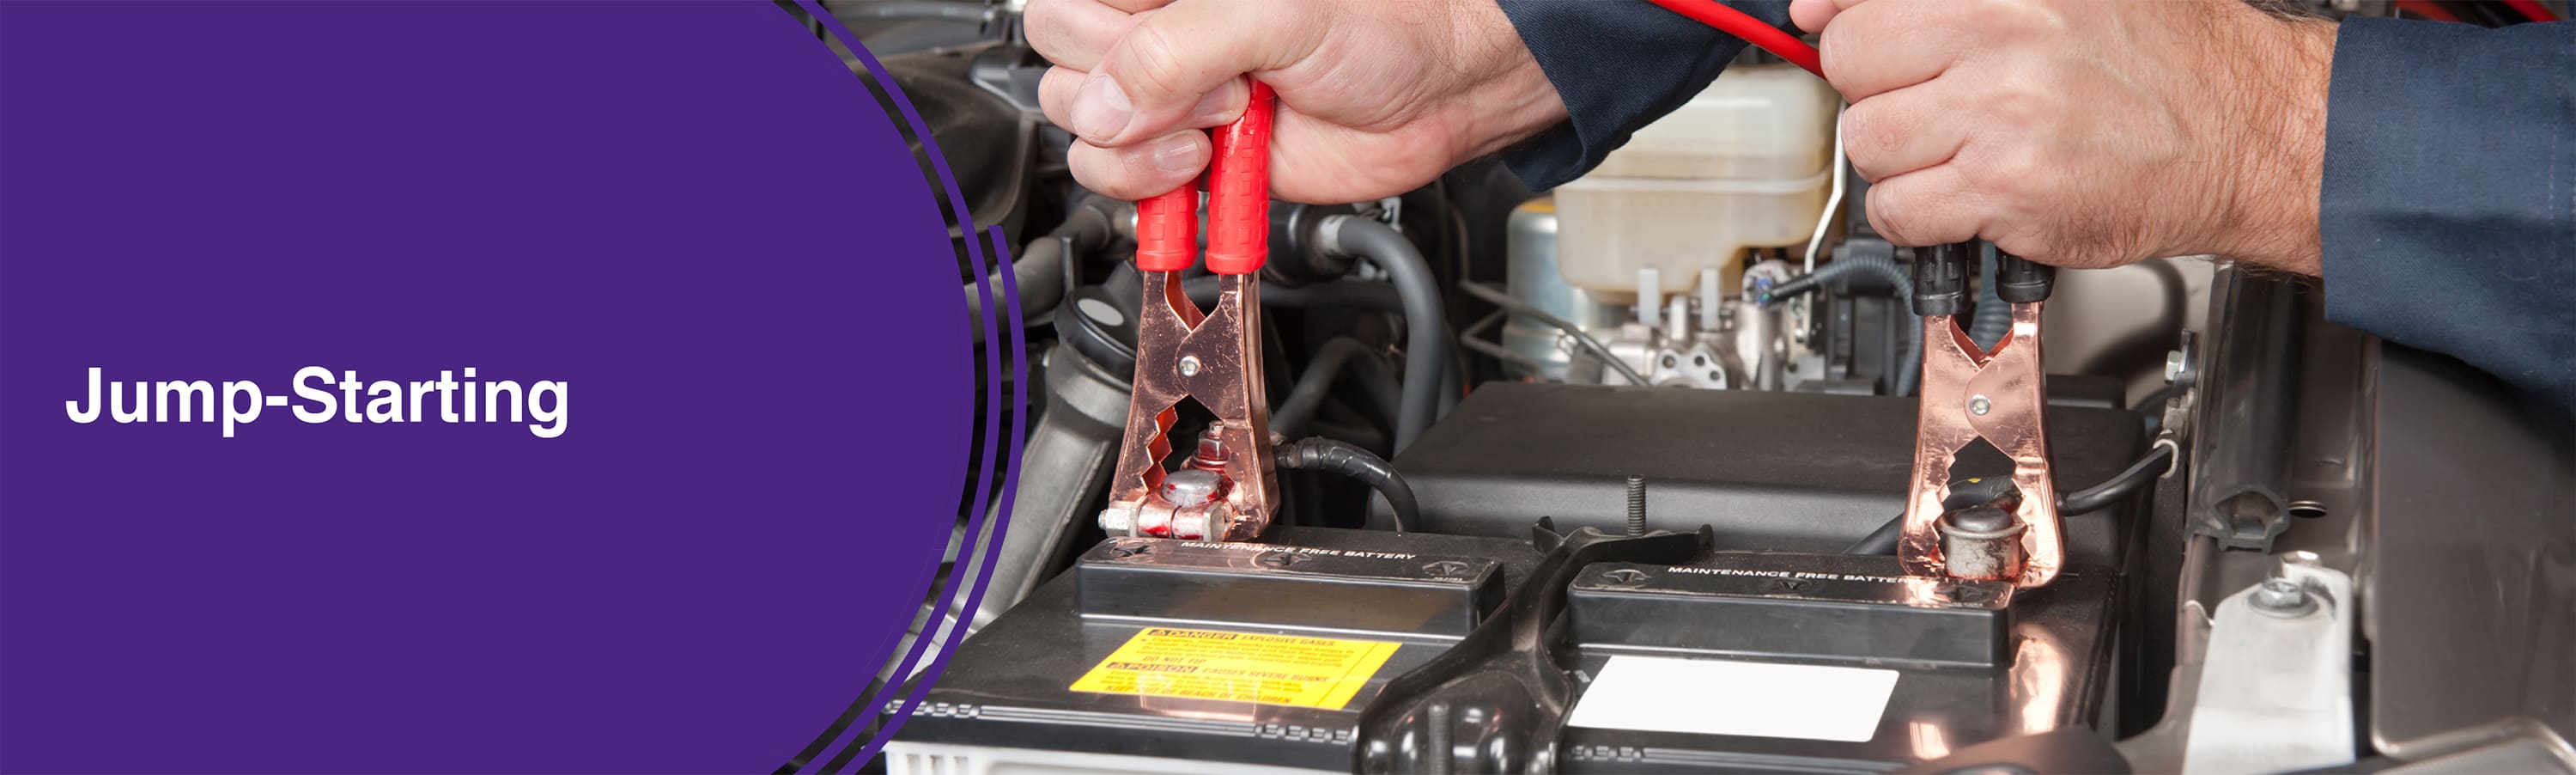 If your car won't start, learn how to jump-start your battery in a few simple steps